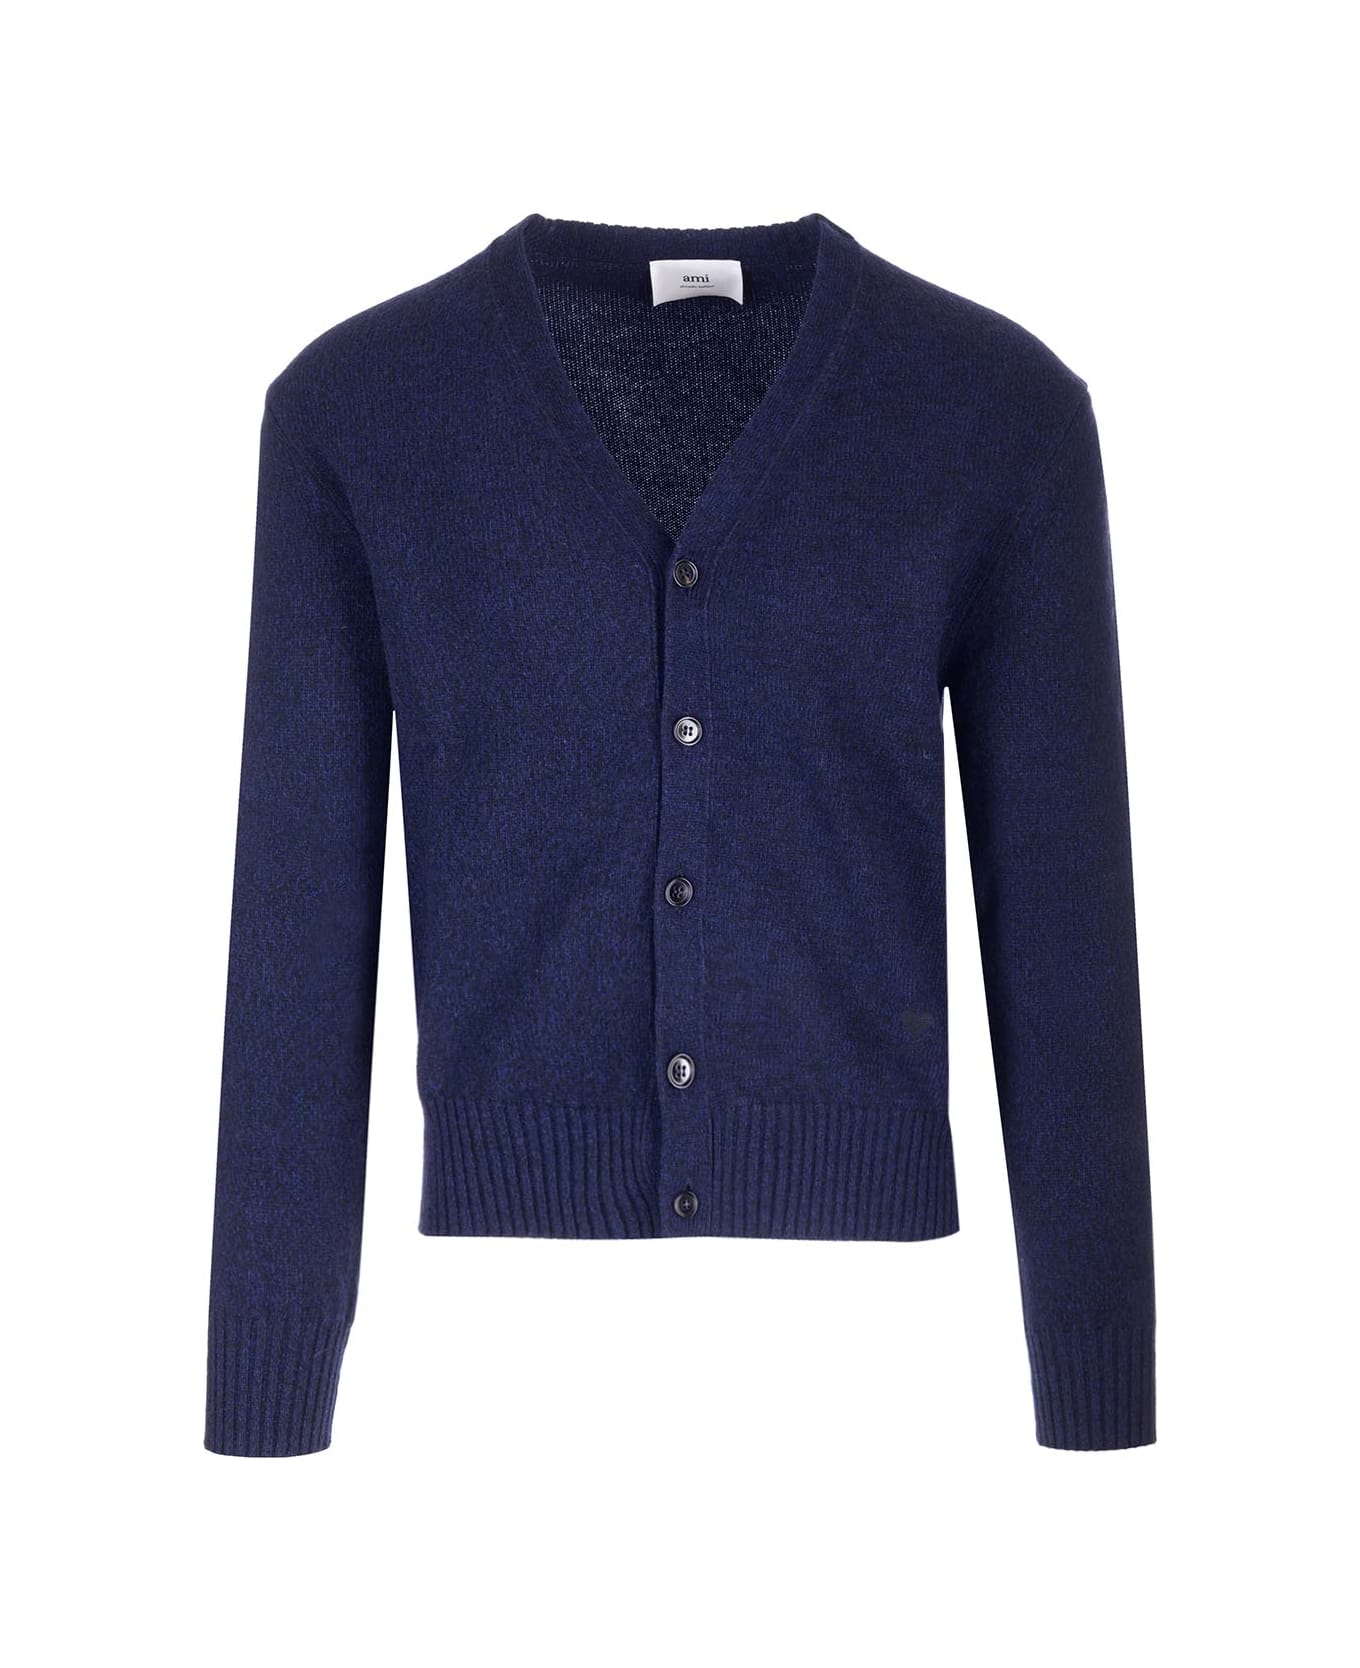 Ami Alexandre Mattiussi Blue Cashmere And Wool Cardigan - NAVY